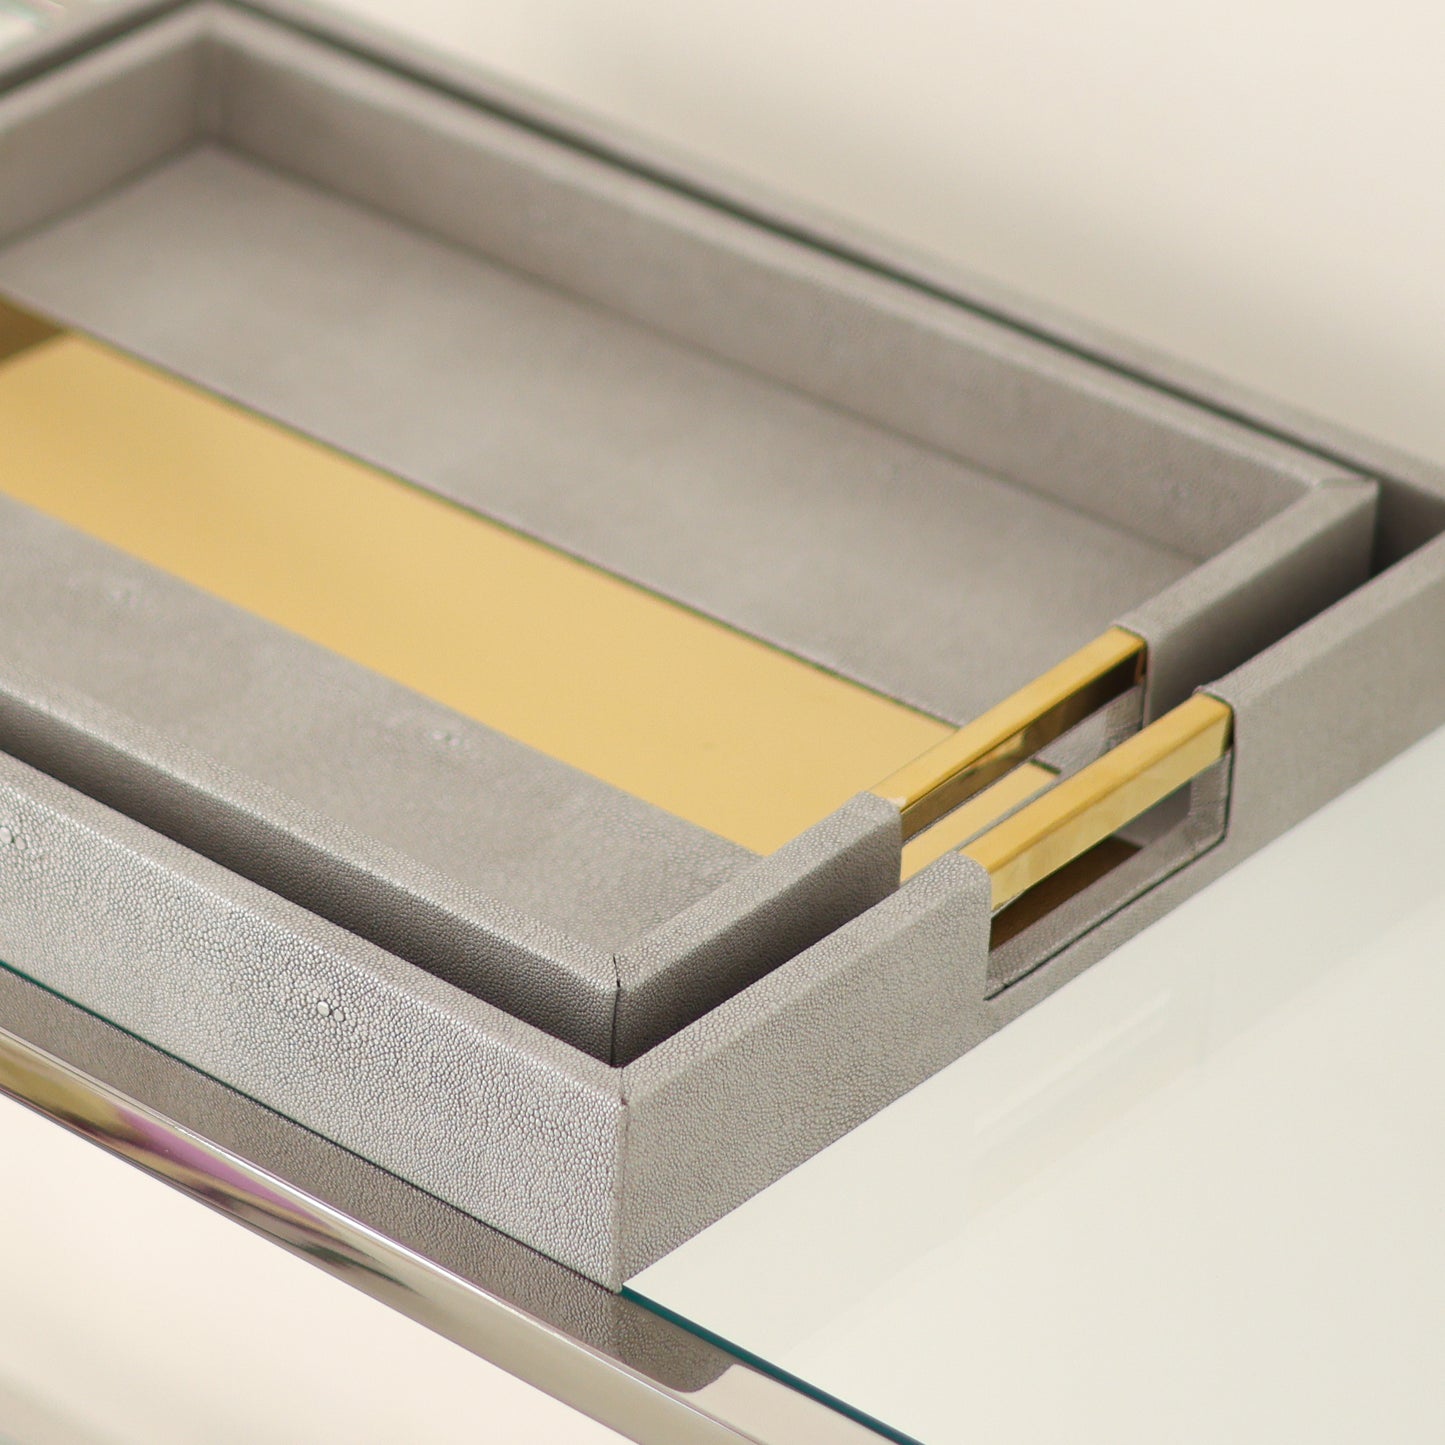 S/2 Gray and gold Trays